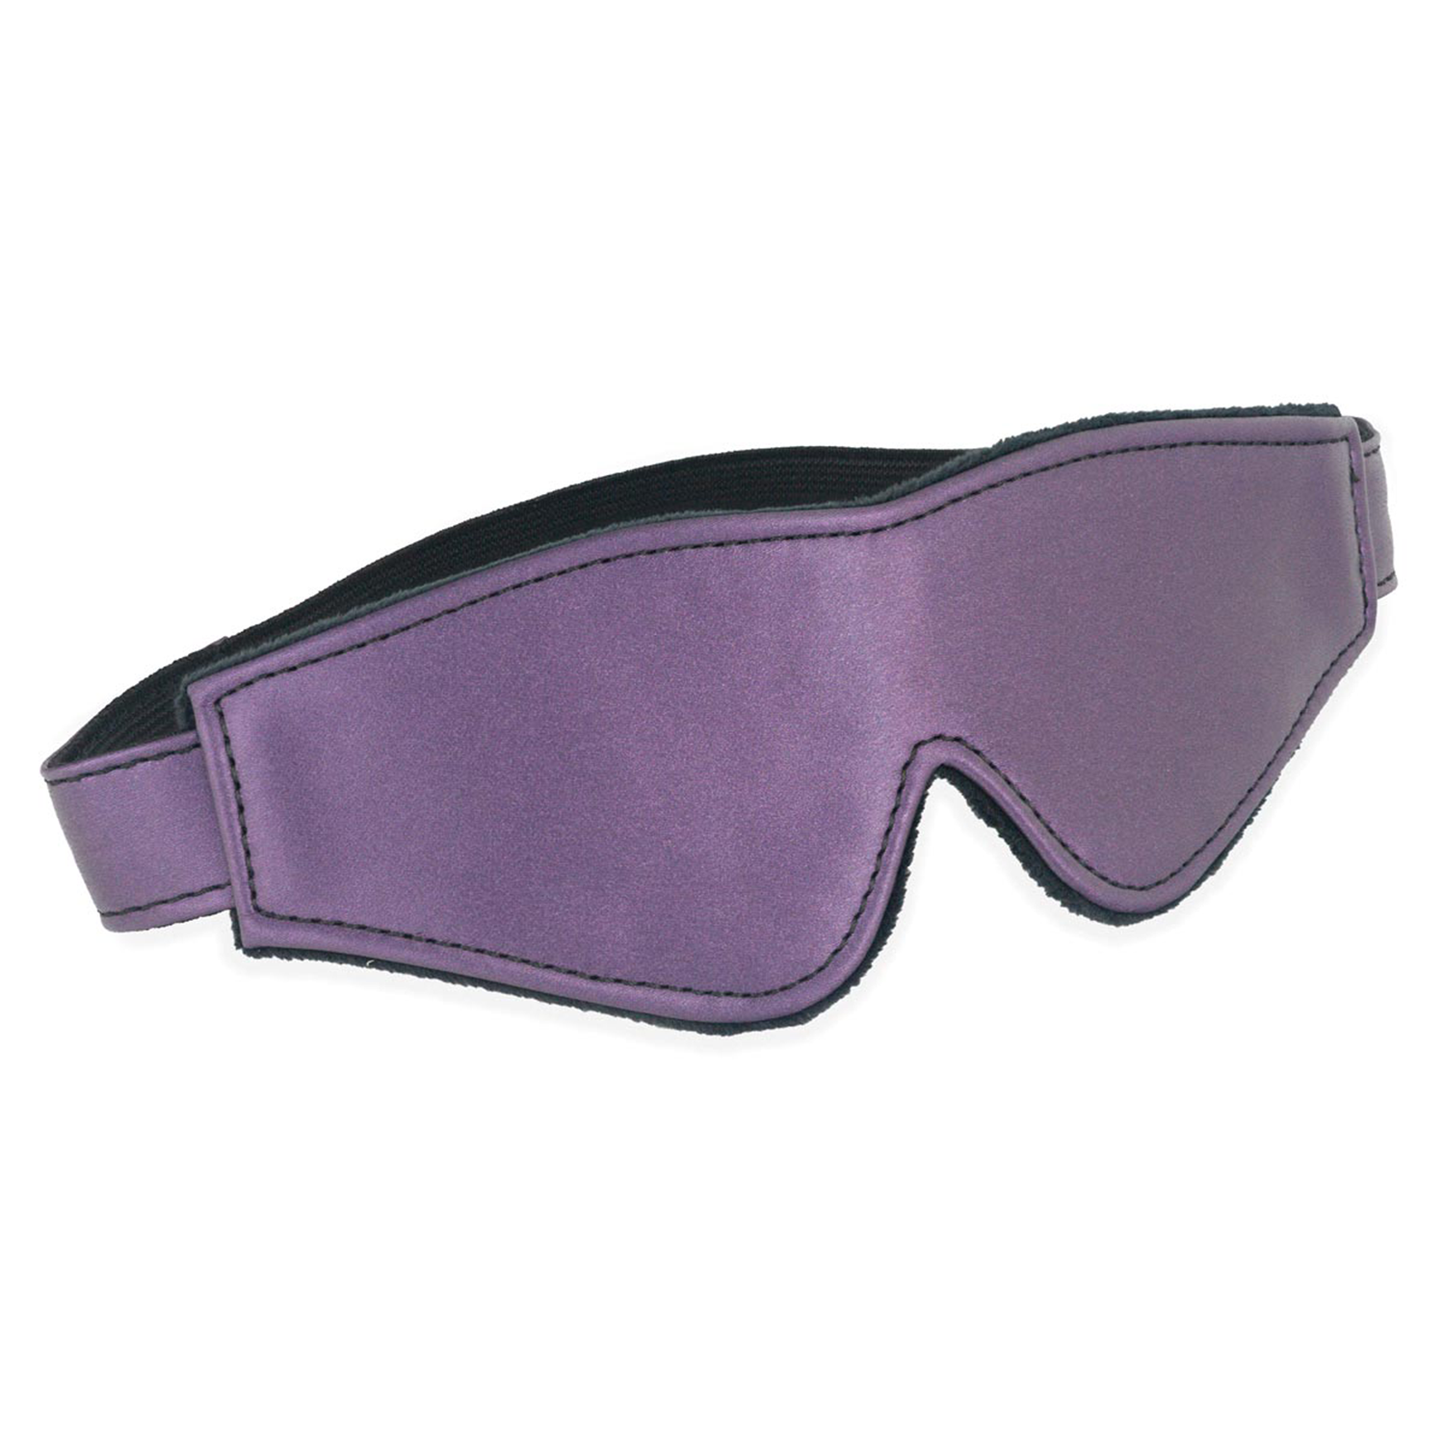 Galaxy Legend Faux Leather Blindfold